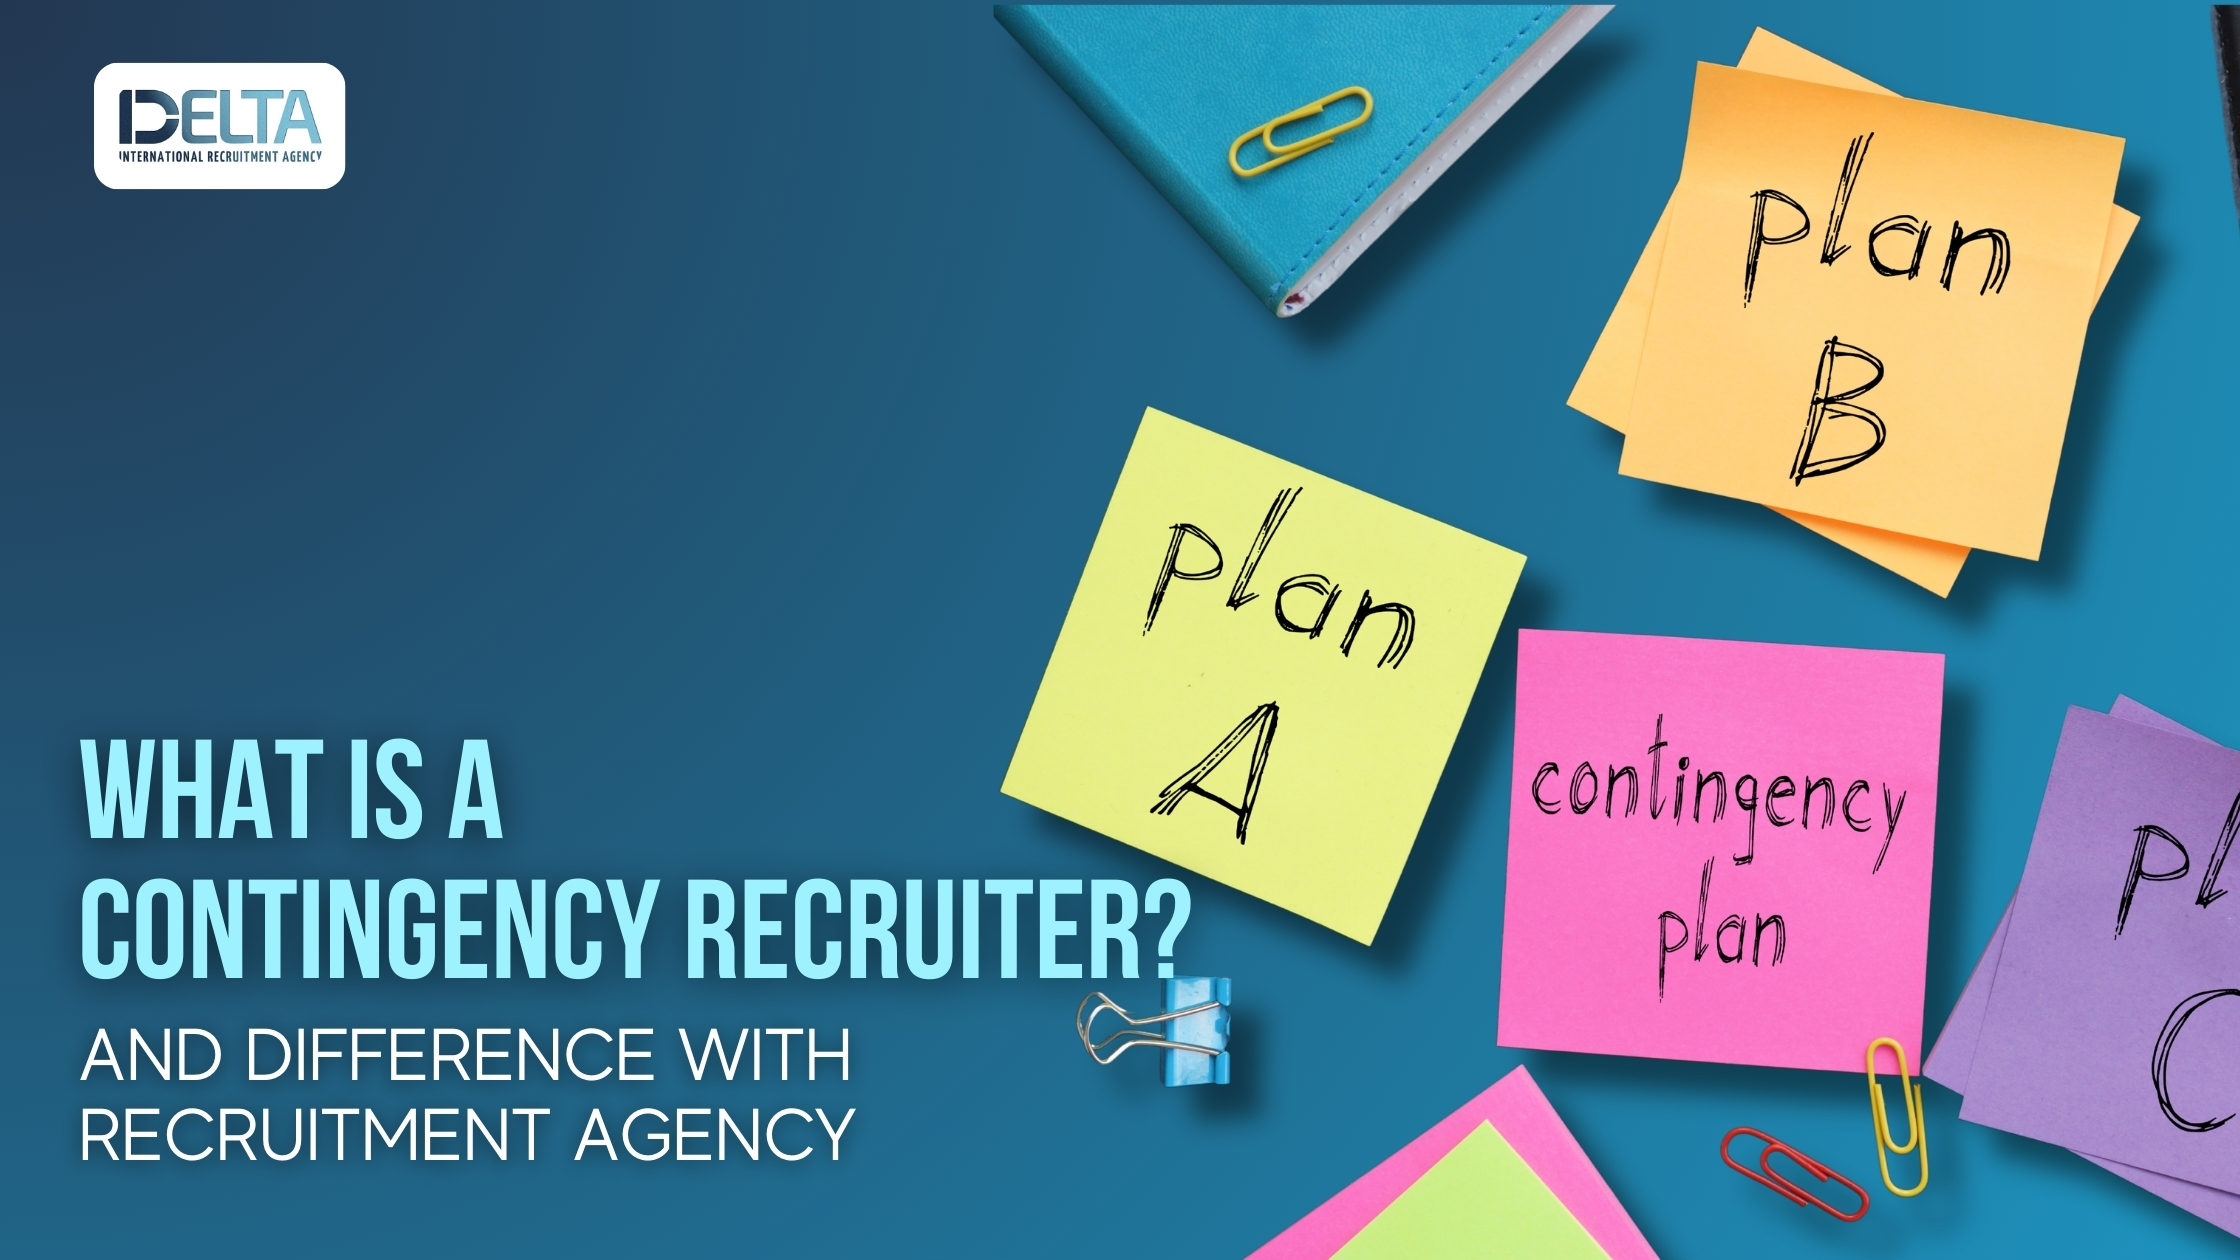 What Is a Contingency Recruiter? And Difference with Recruitment Agency